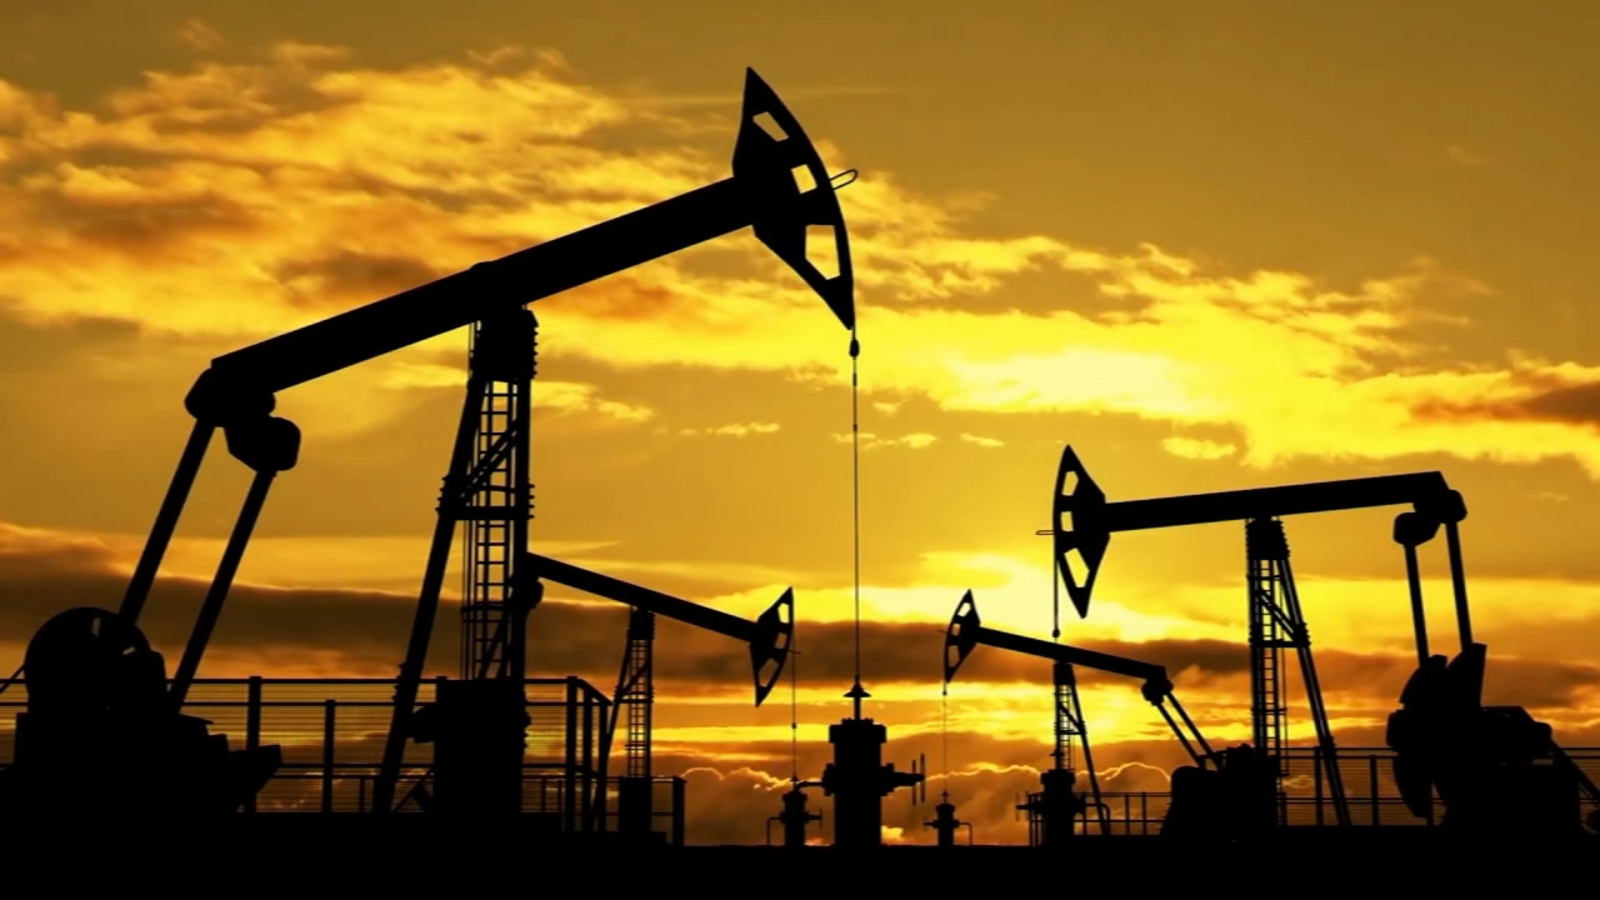 Texas economy could lose US$24 billion due to oil prices